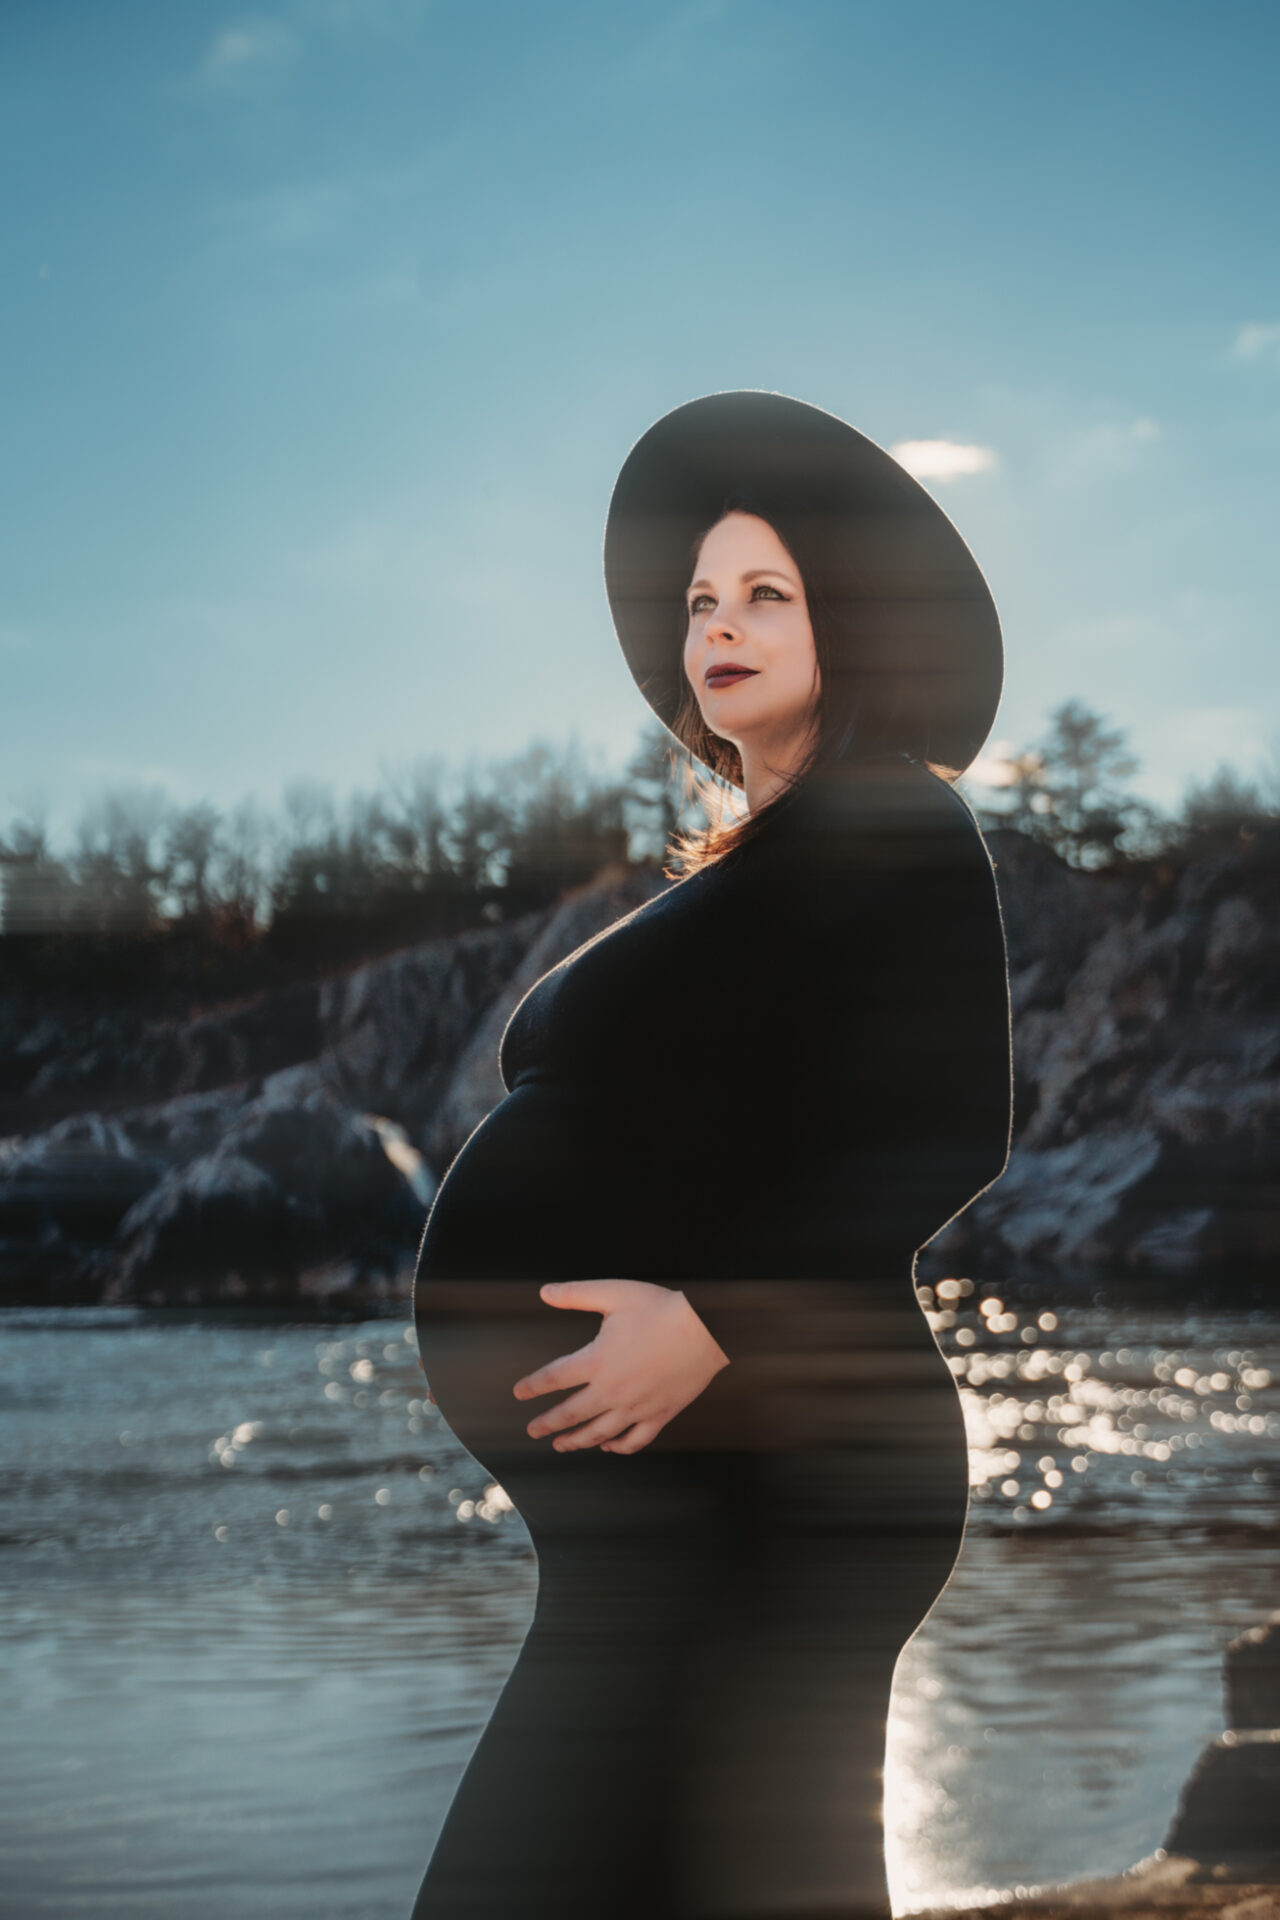 creative maternity image with intentional blur